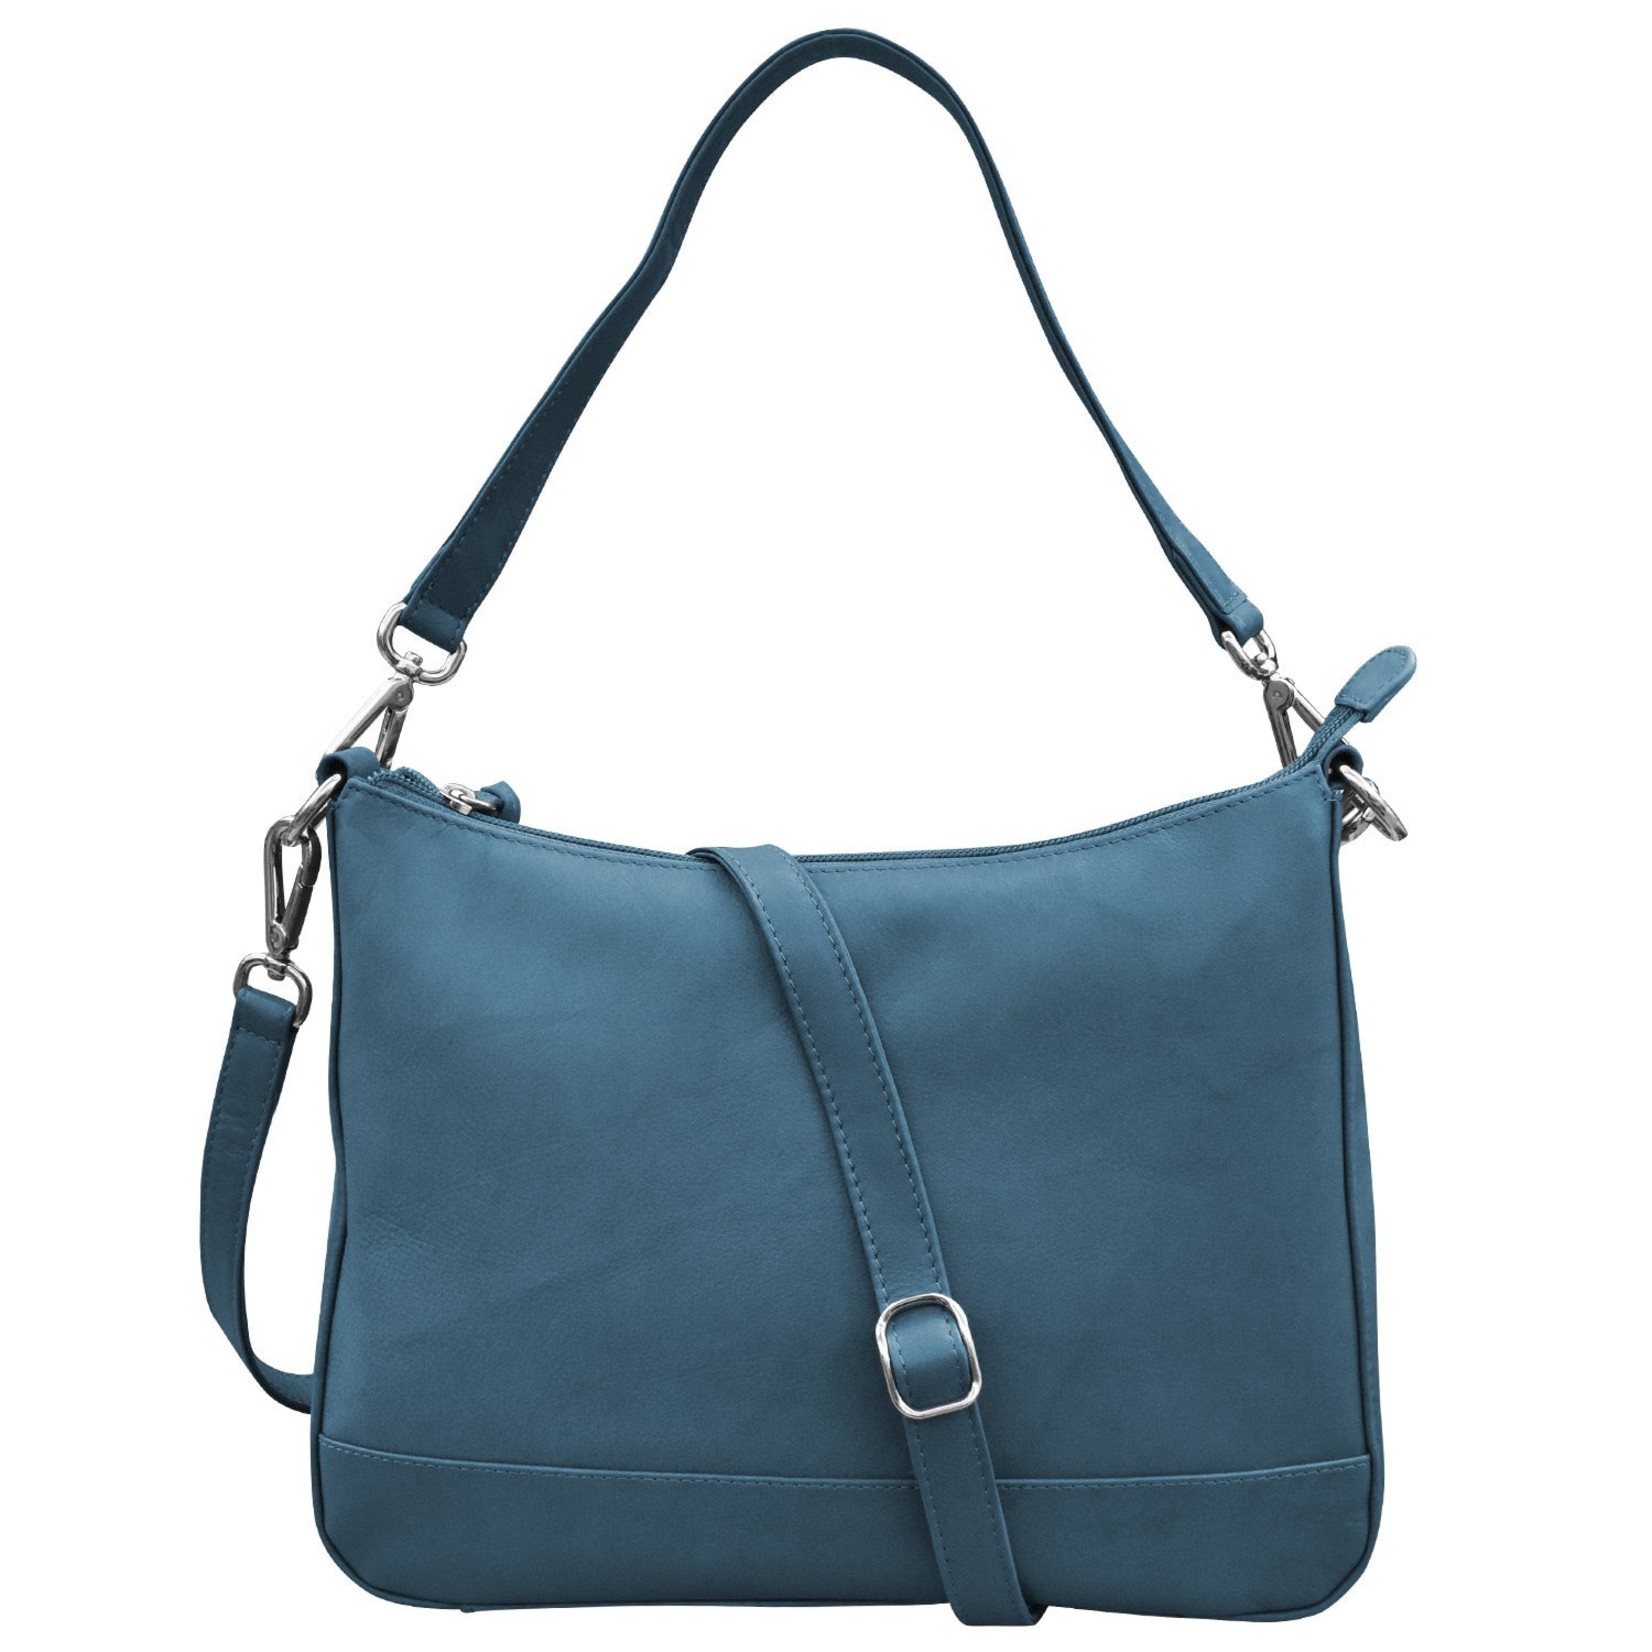 Leather Handbags and Accessories 6091 Jeans Blue - Zip Top Hobo